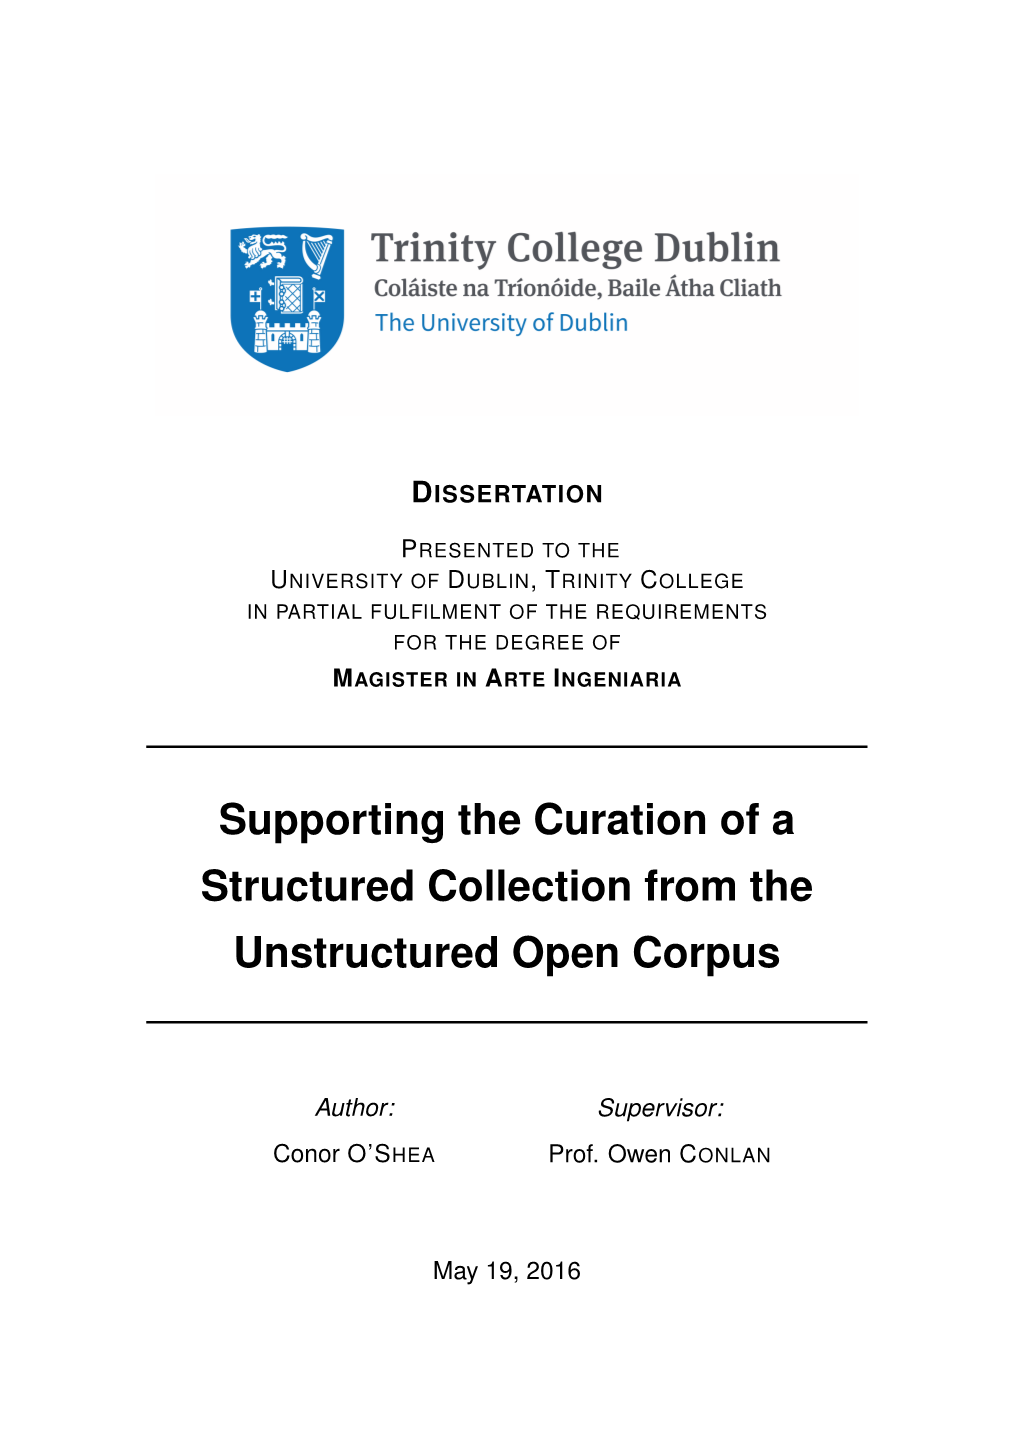 Supporting the Curation of a Structured Collection from the Unstructured Open Corpus